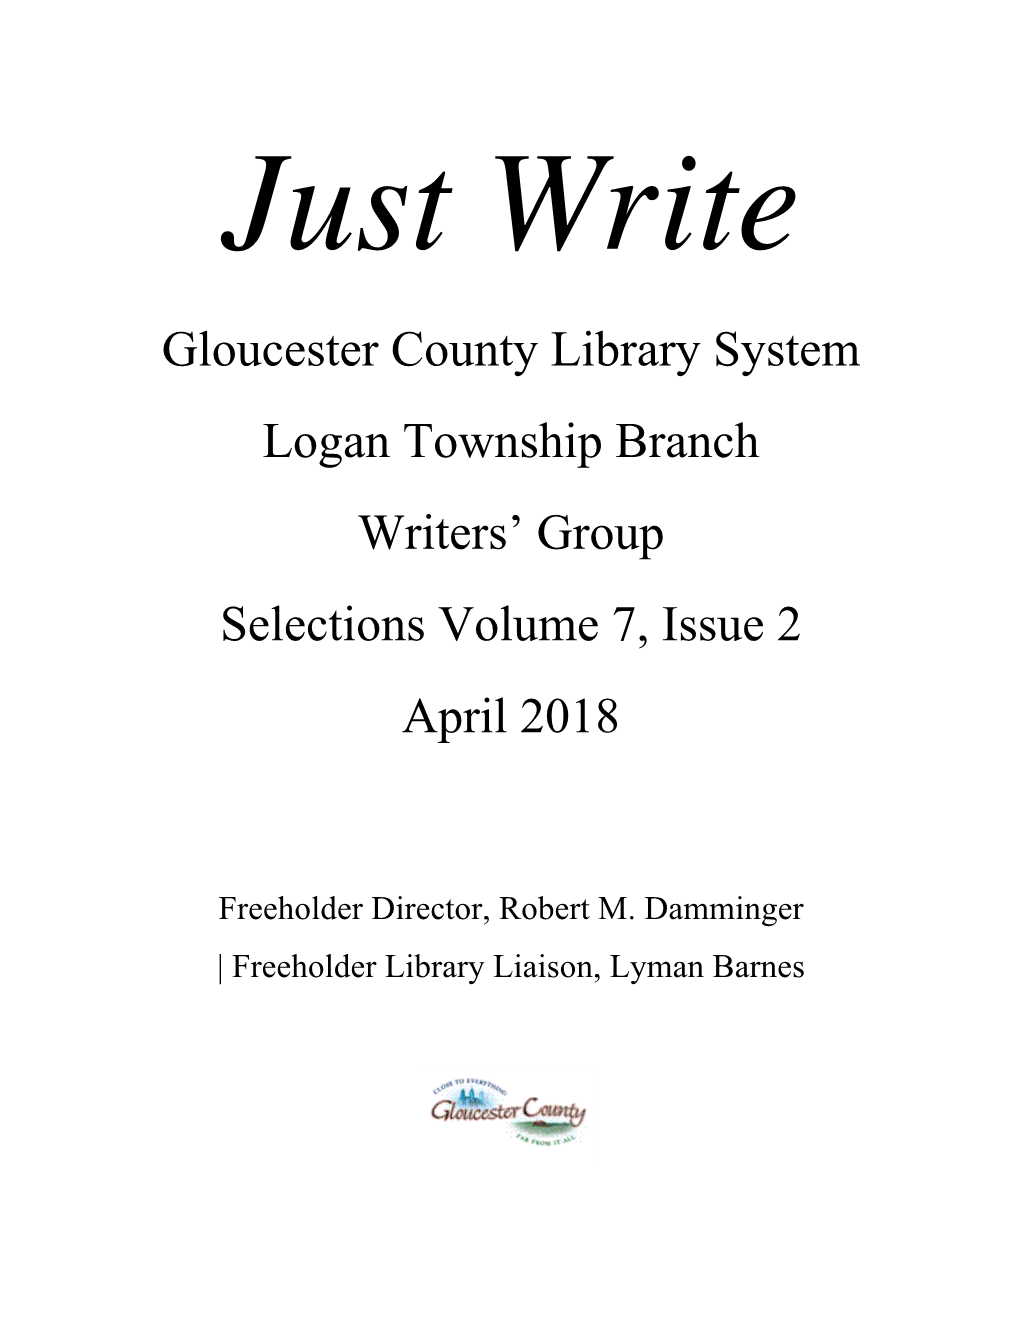 Just Write, Volume 7, Issue 2, April